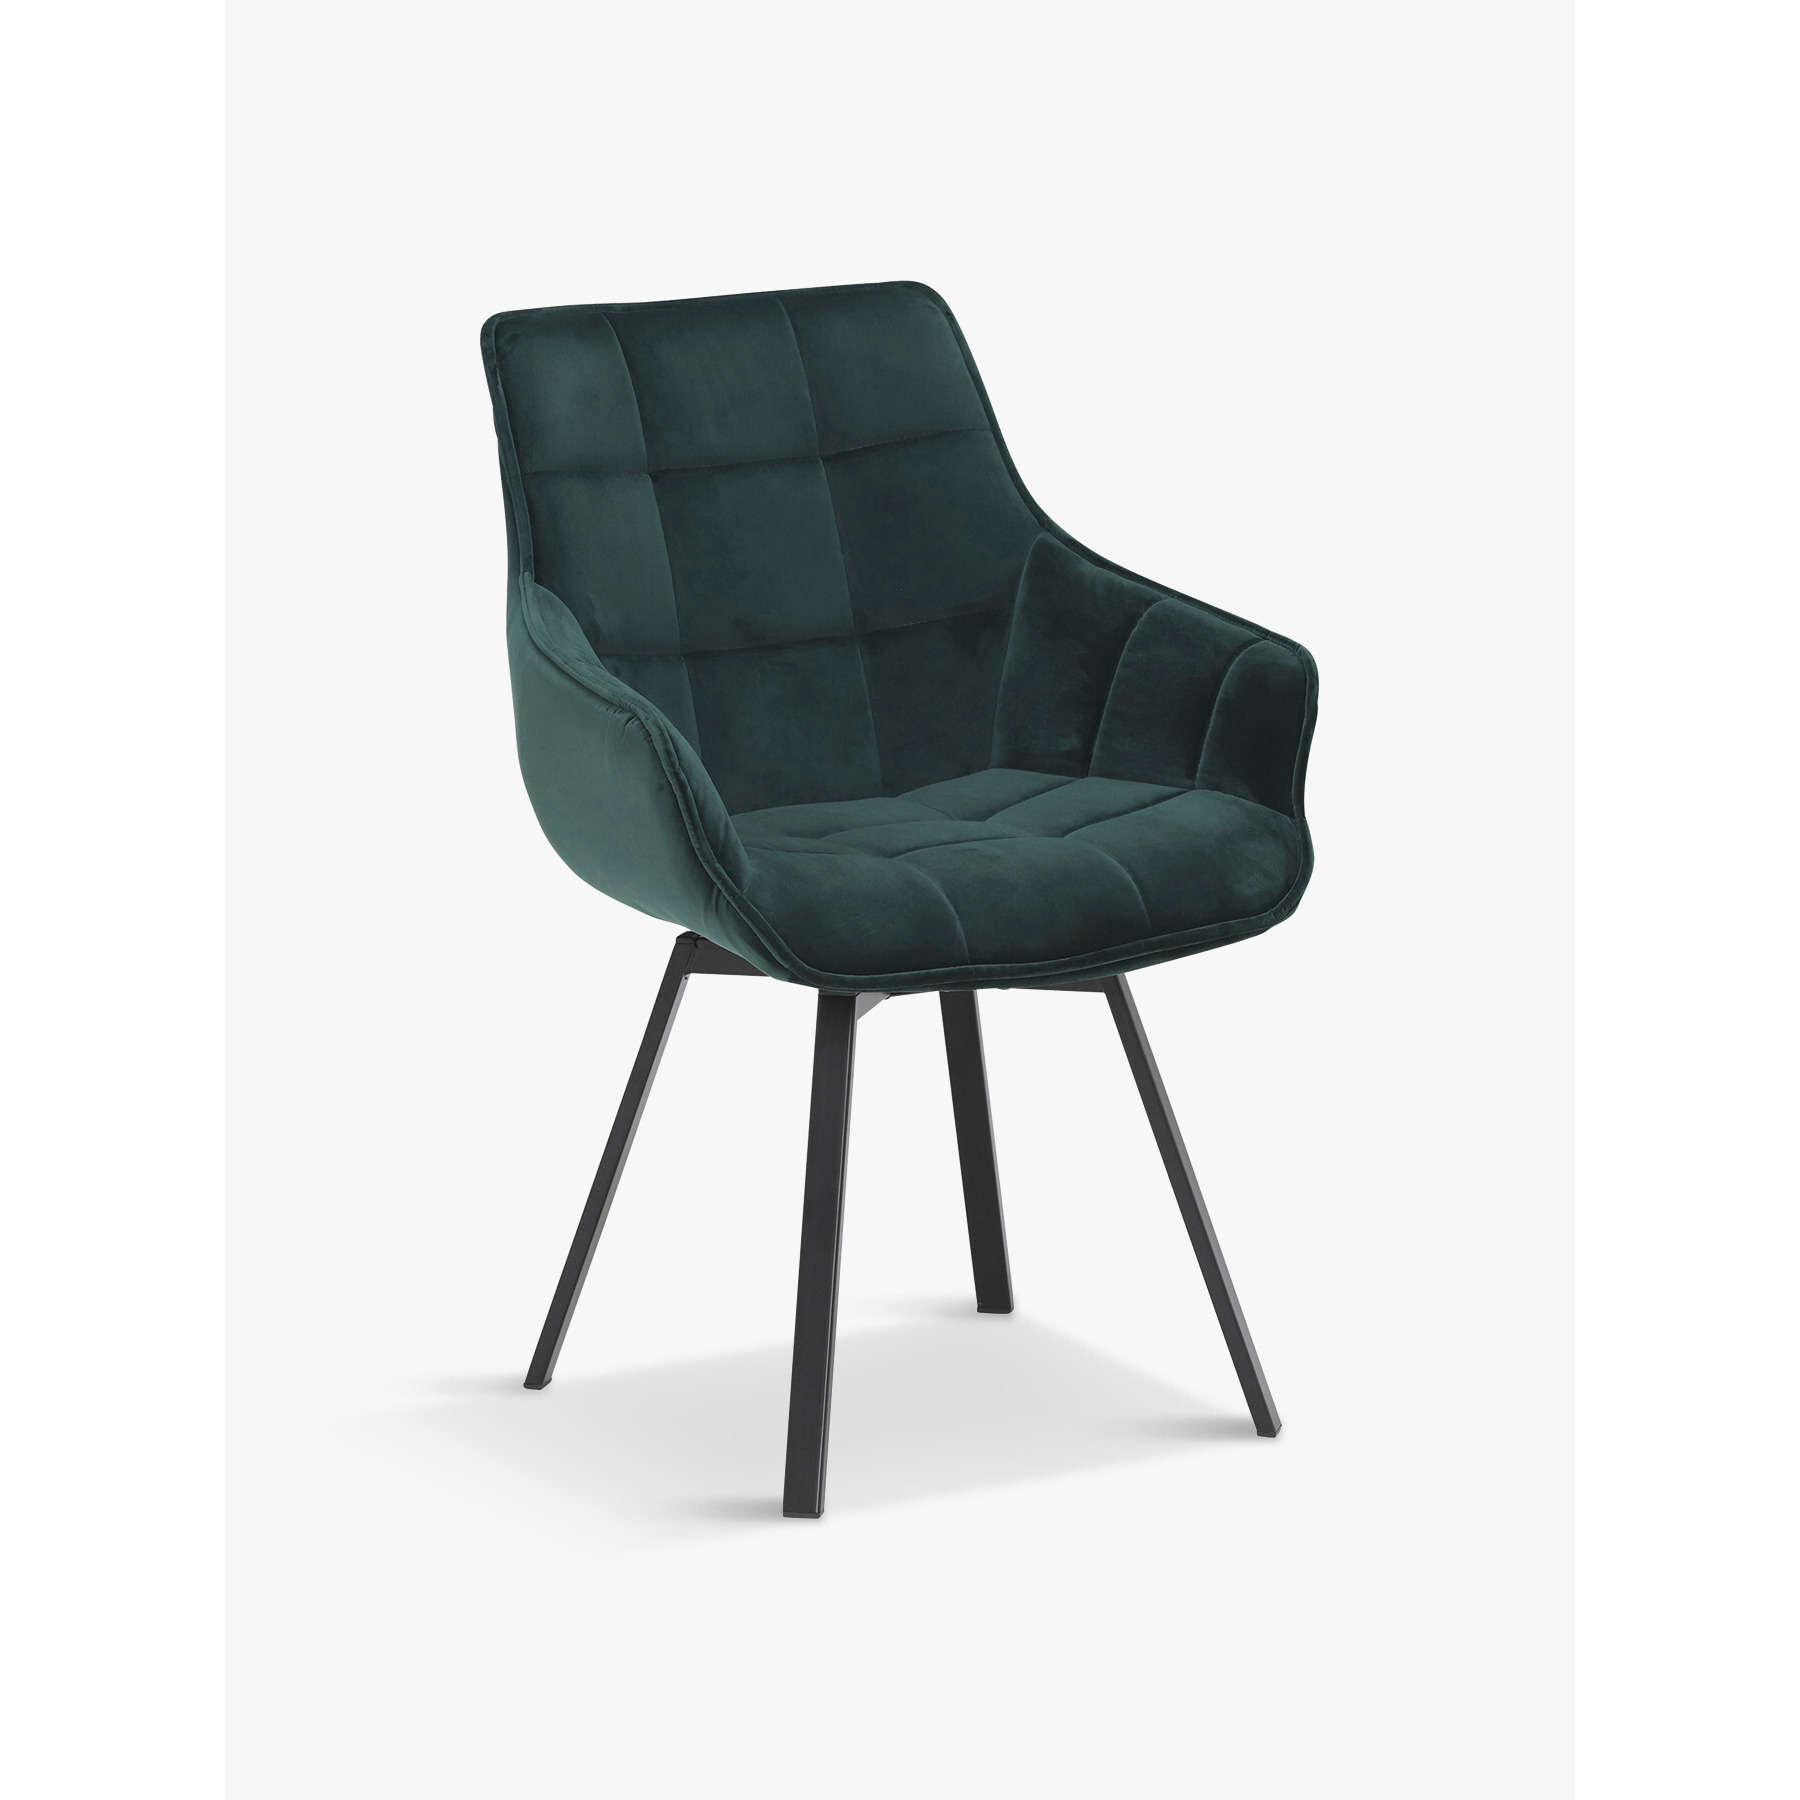 Barker and Stonehouse Jasper Dining Chair, Green - image 1